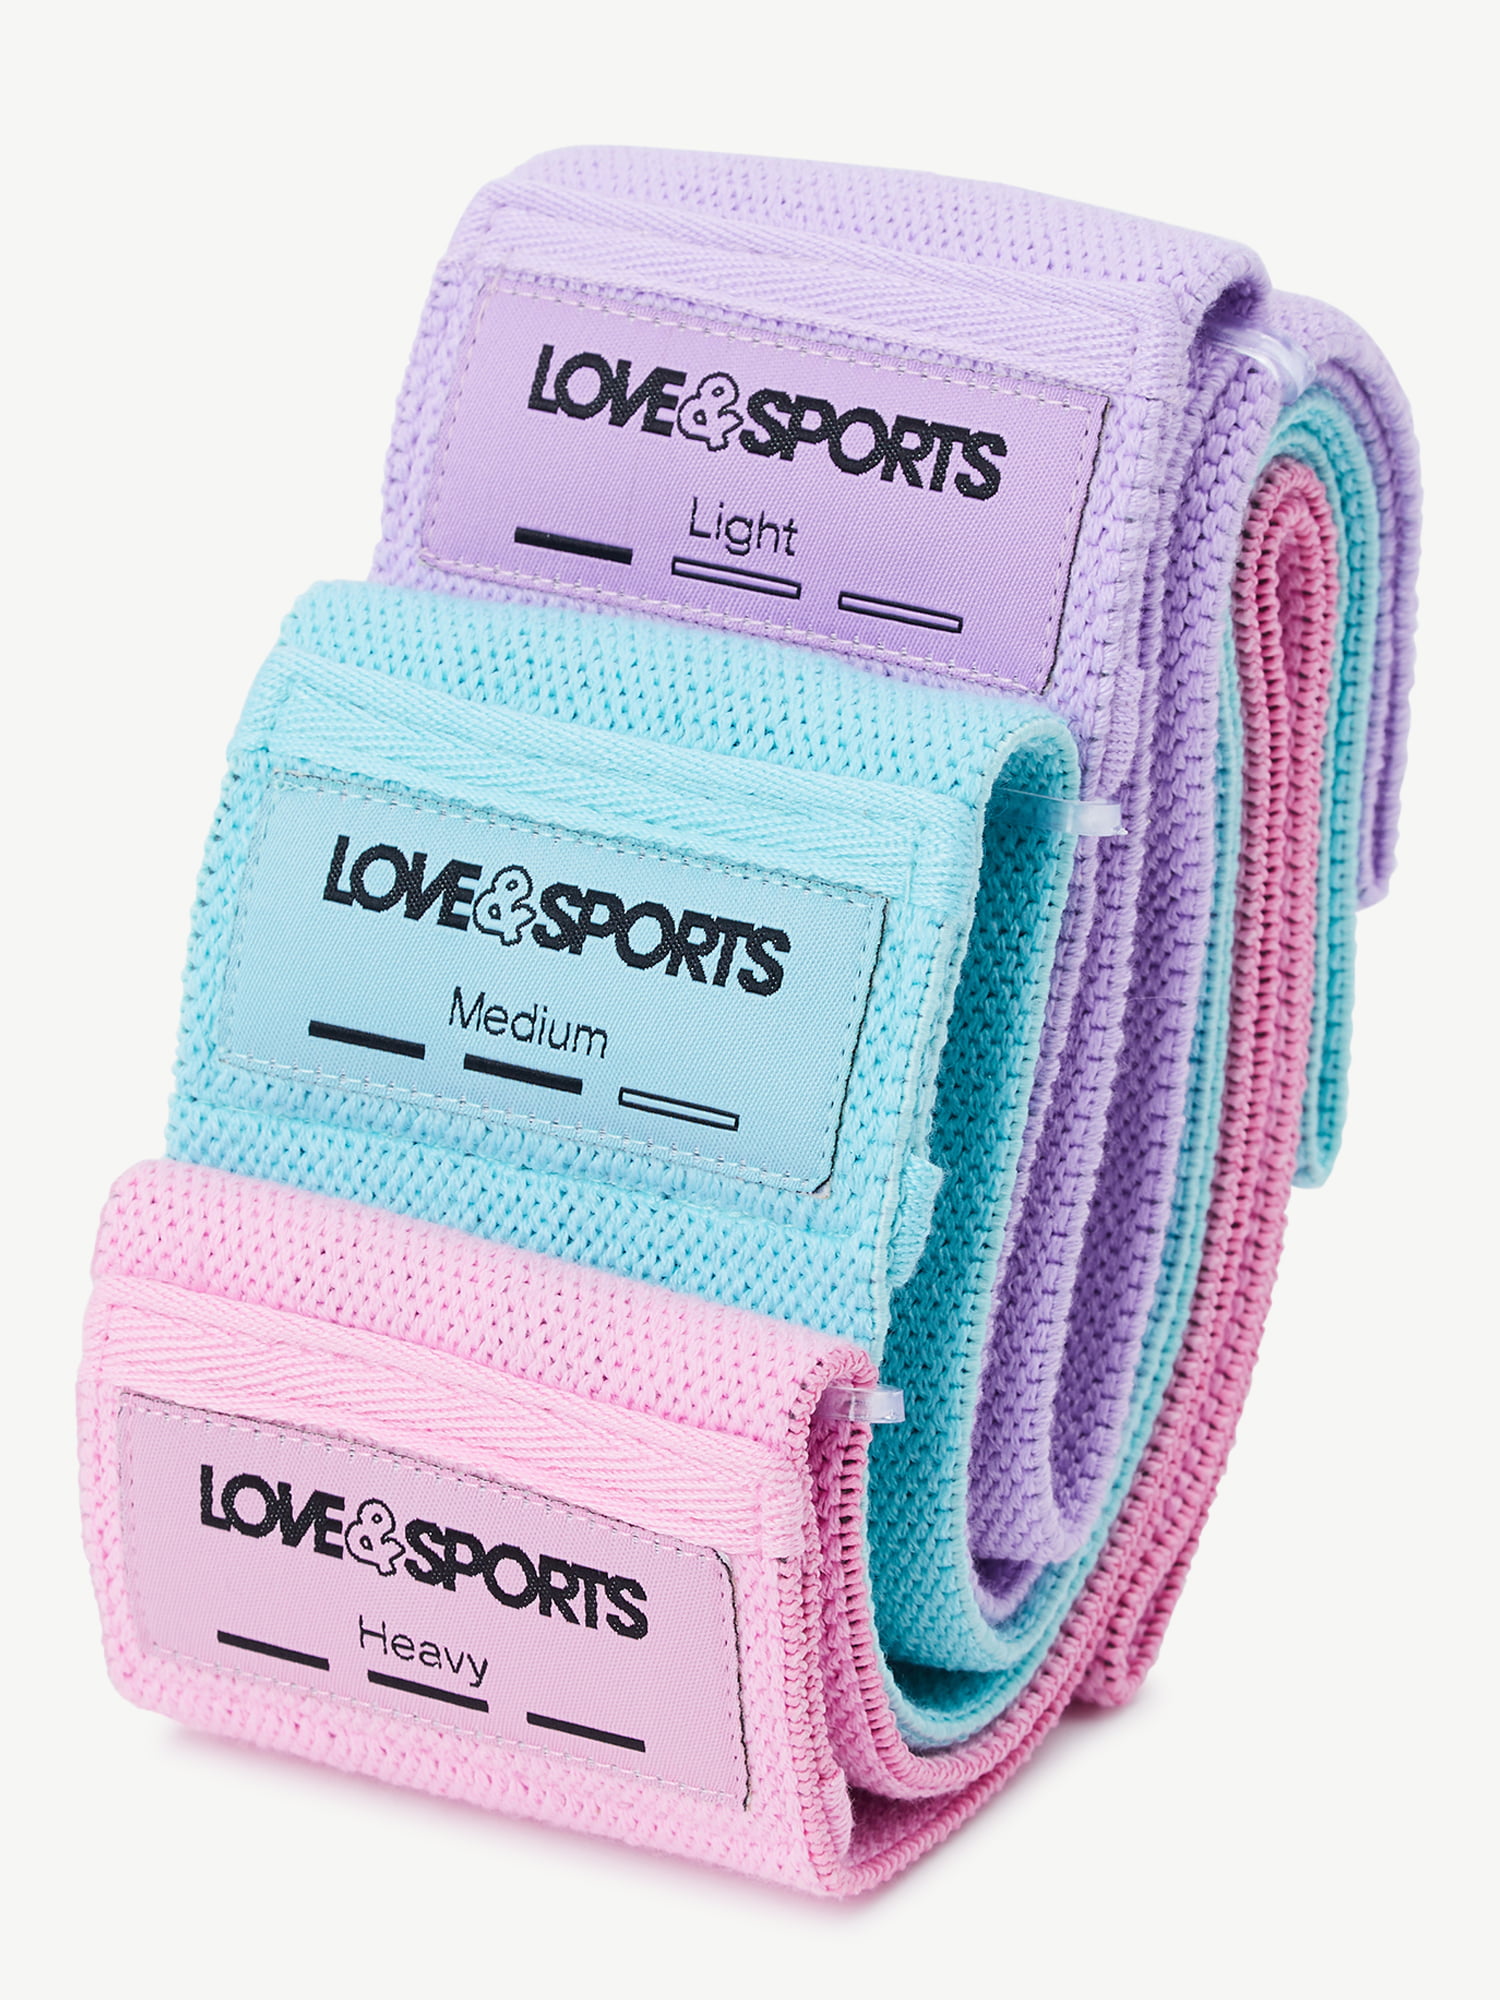 Love & Sports Unisex Adult Fitness Tracker Watch with 3 Resistance Bands 